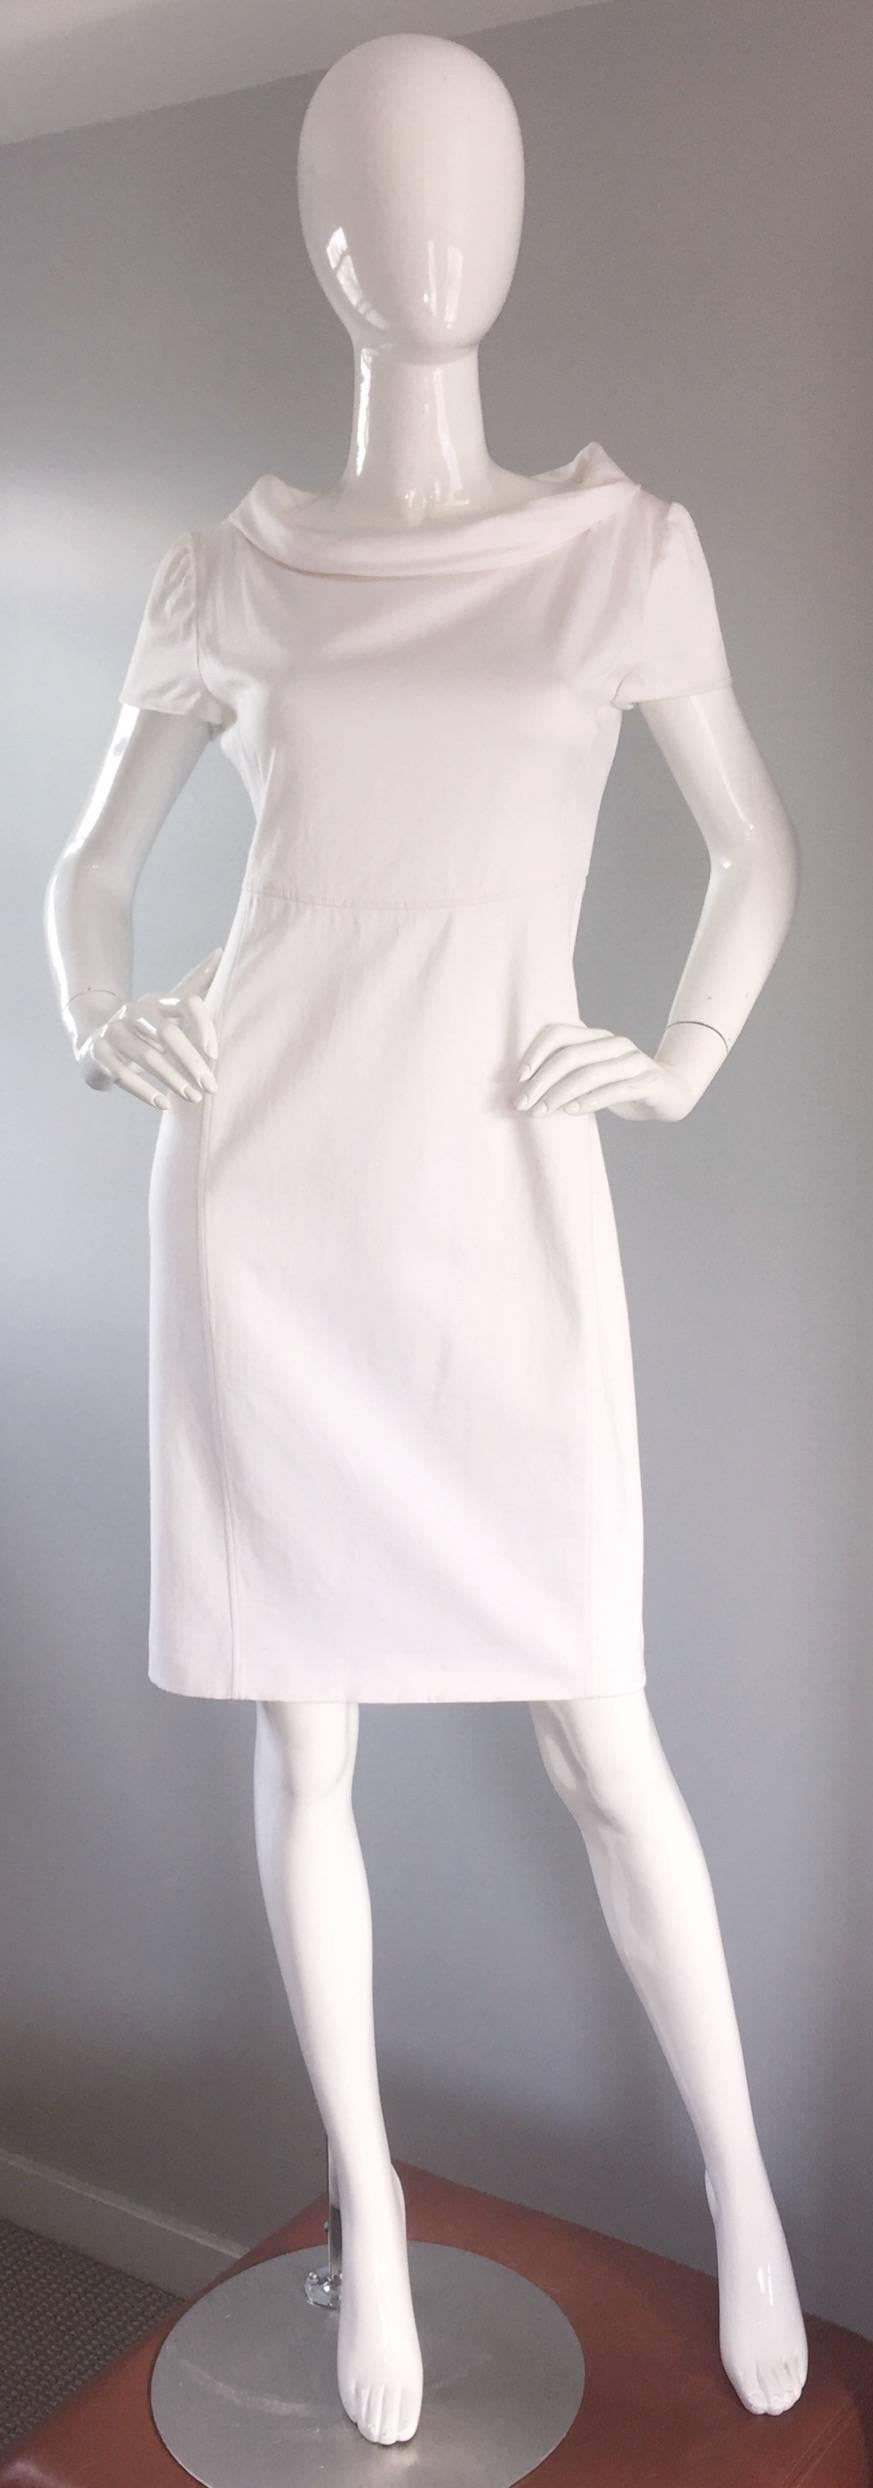 Brand new, never worn super chic VALENTINO stark white dress! Jackie O style, reminiscent of the 1960s. Flattering fit, with an equally flattering cowl neck. Cotton, with some stretch. Hidden zipper up the back, with three hook-and-eye closures at